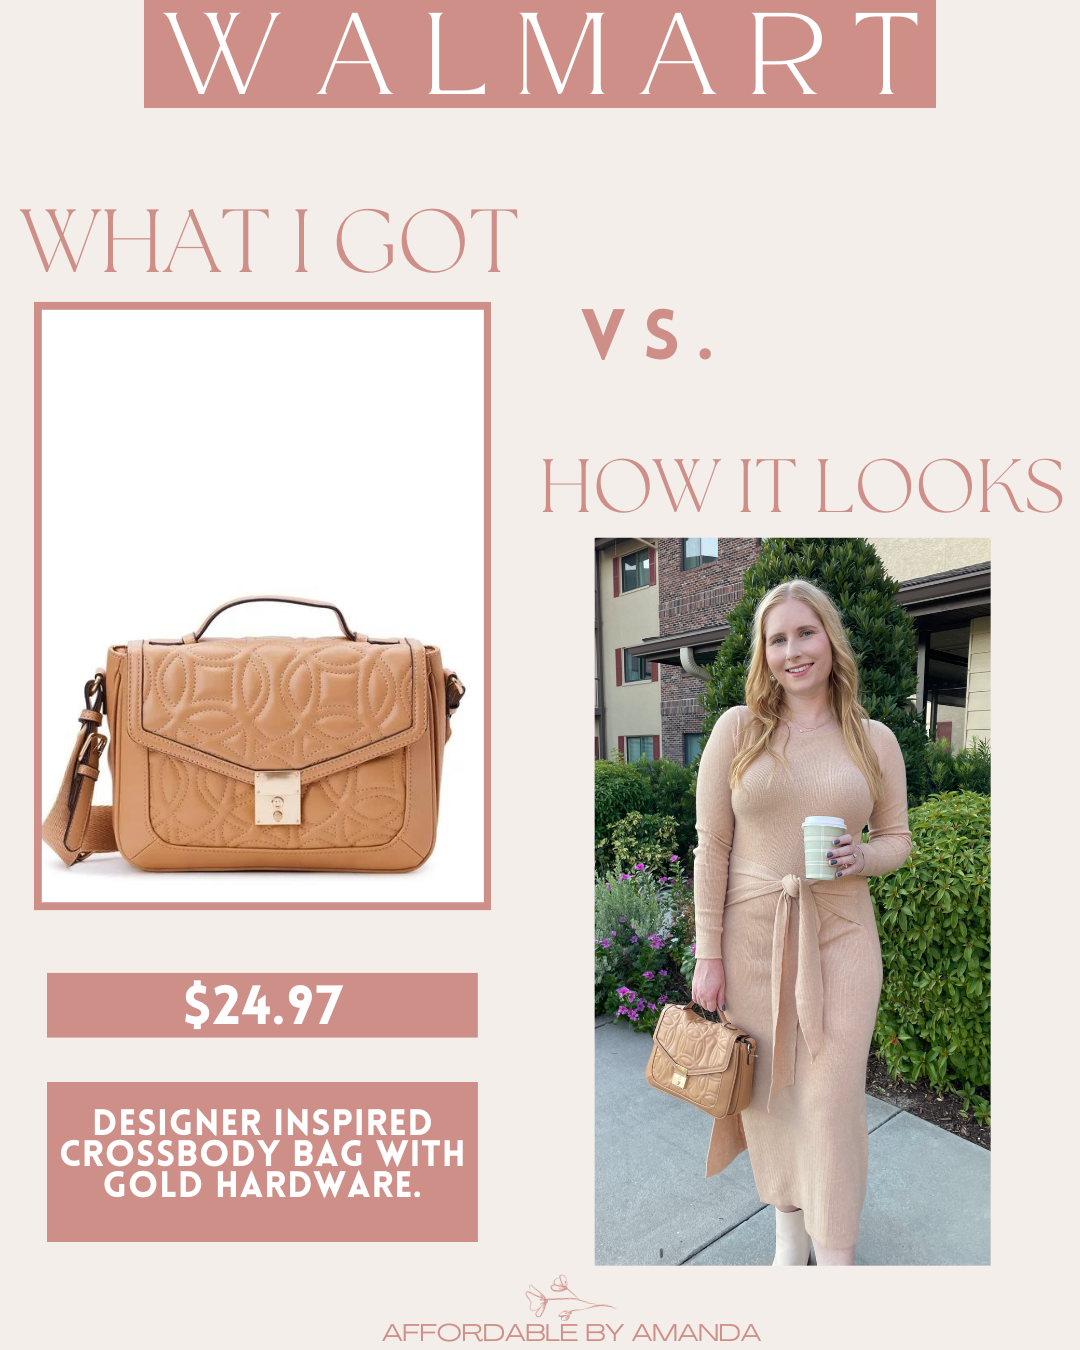 Time and Tru Women's Kate Flap Front Crossbody Handbag, Quilted Golden Honey | Top 10 Walmart Must Haves Under $50 | Styled Try-On Haul with fall fashion from Walmart